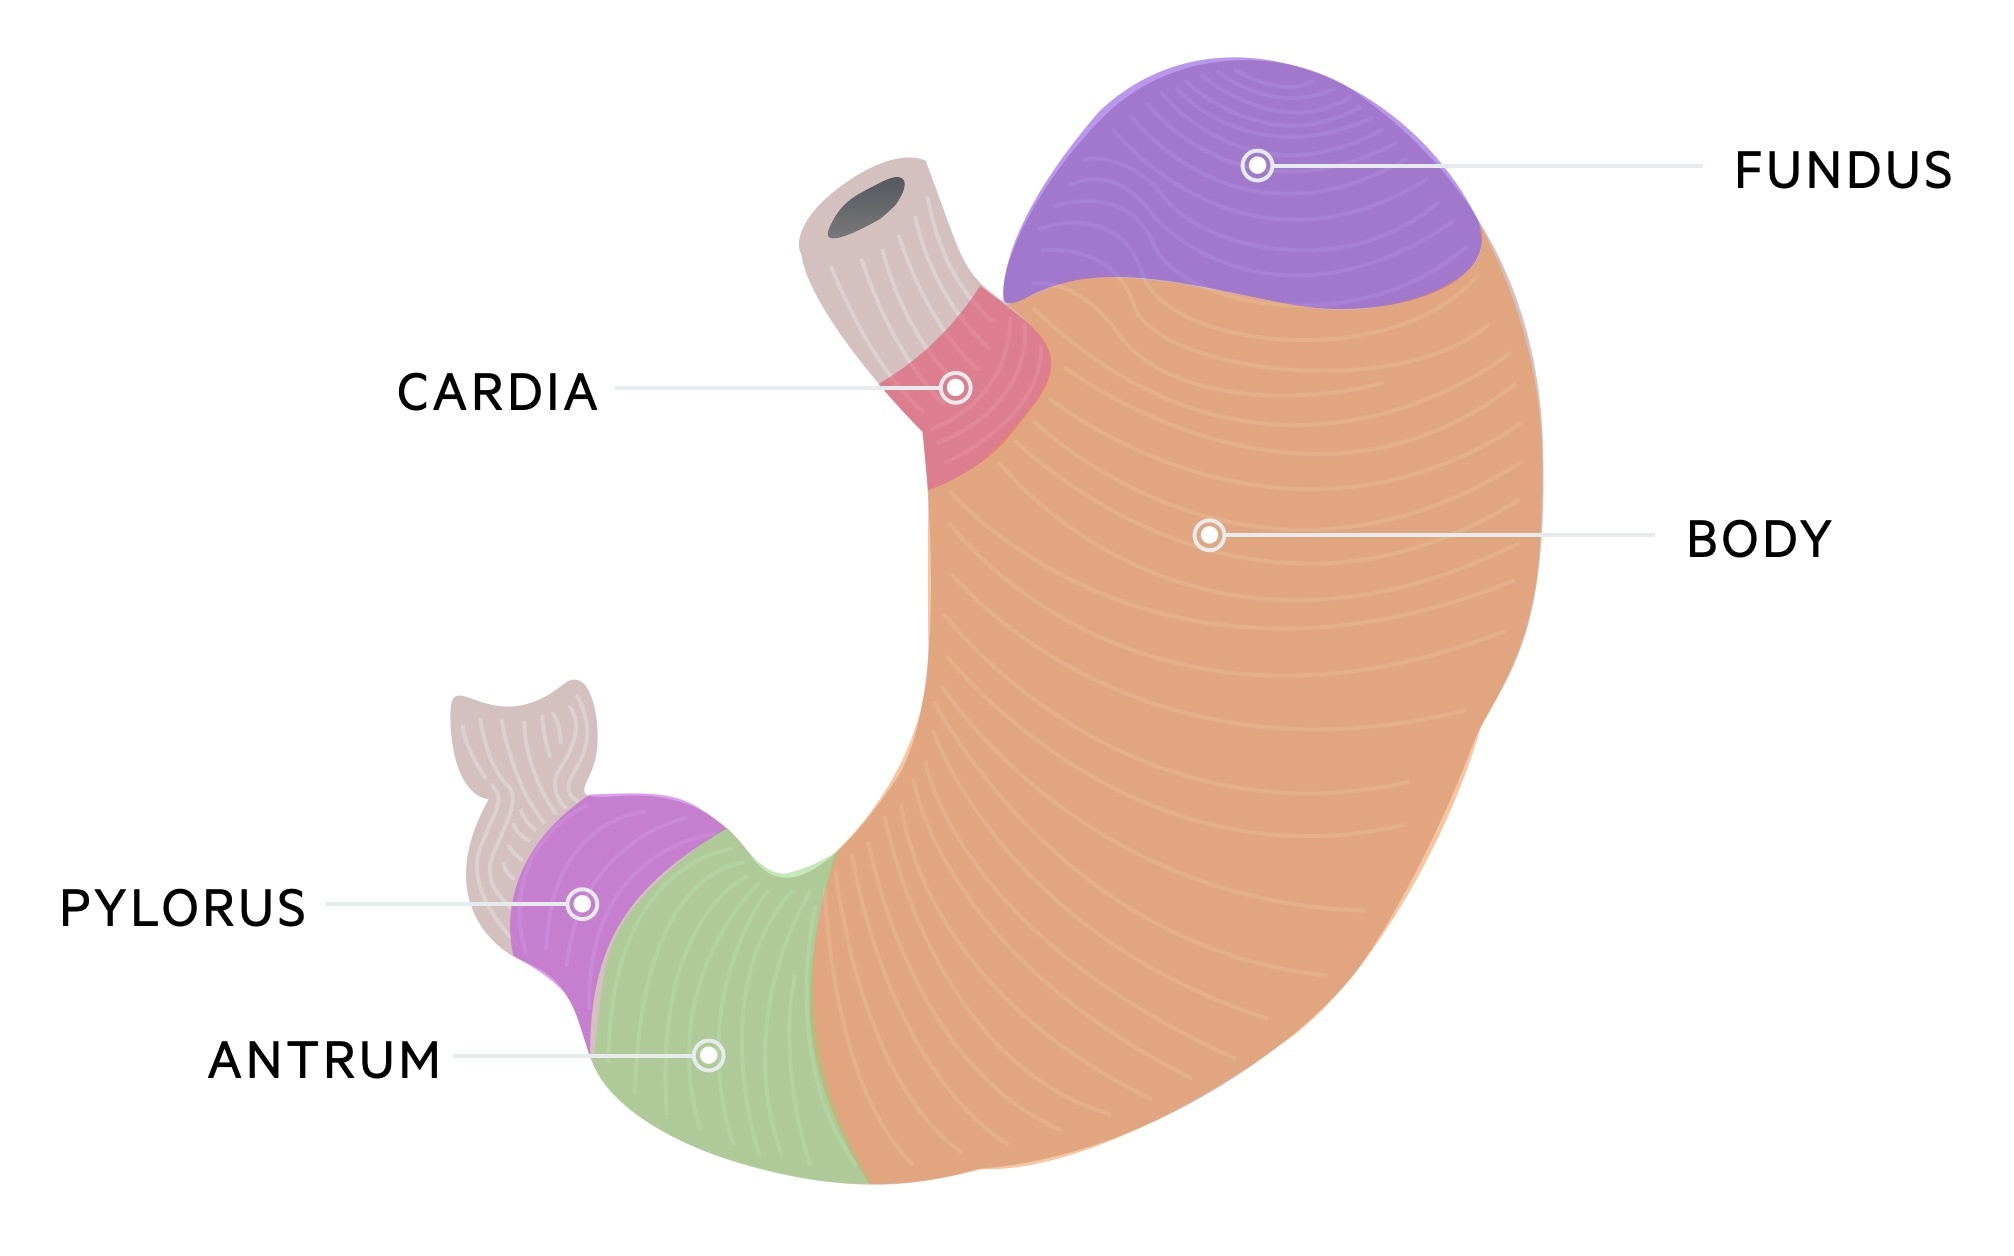 Anatomy of the stomach